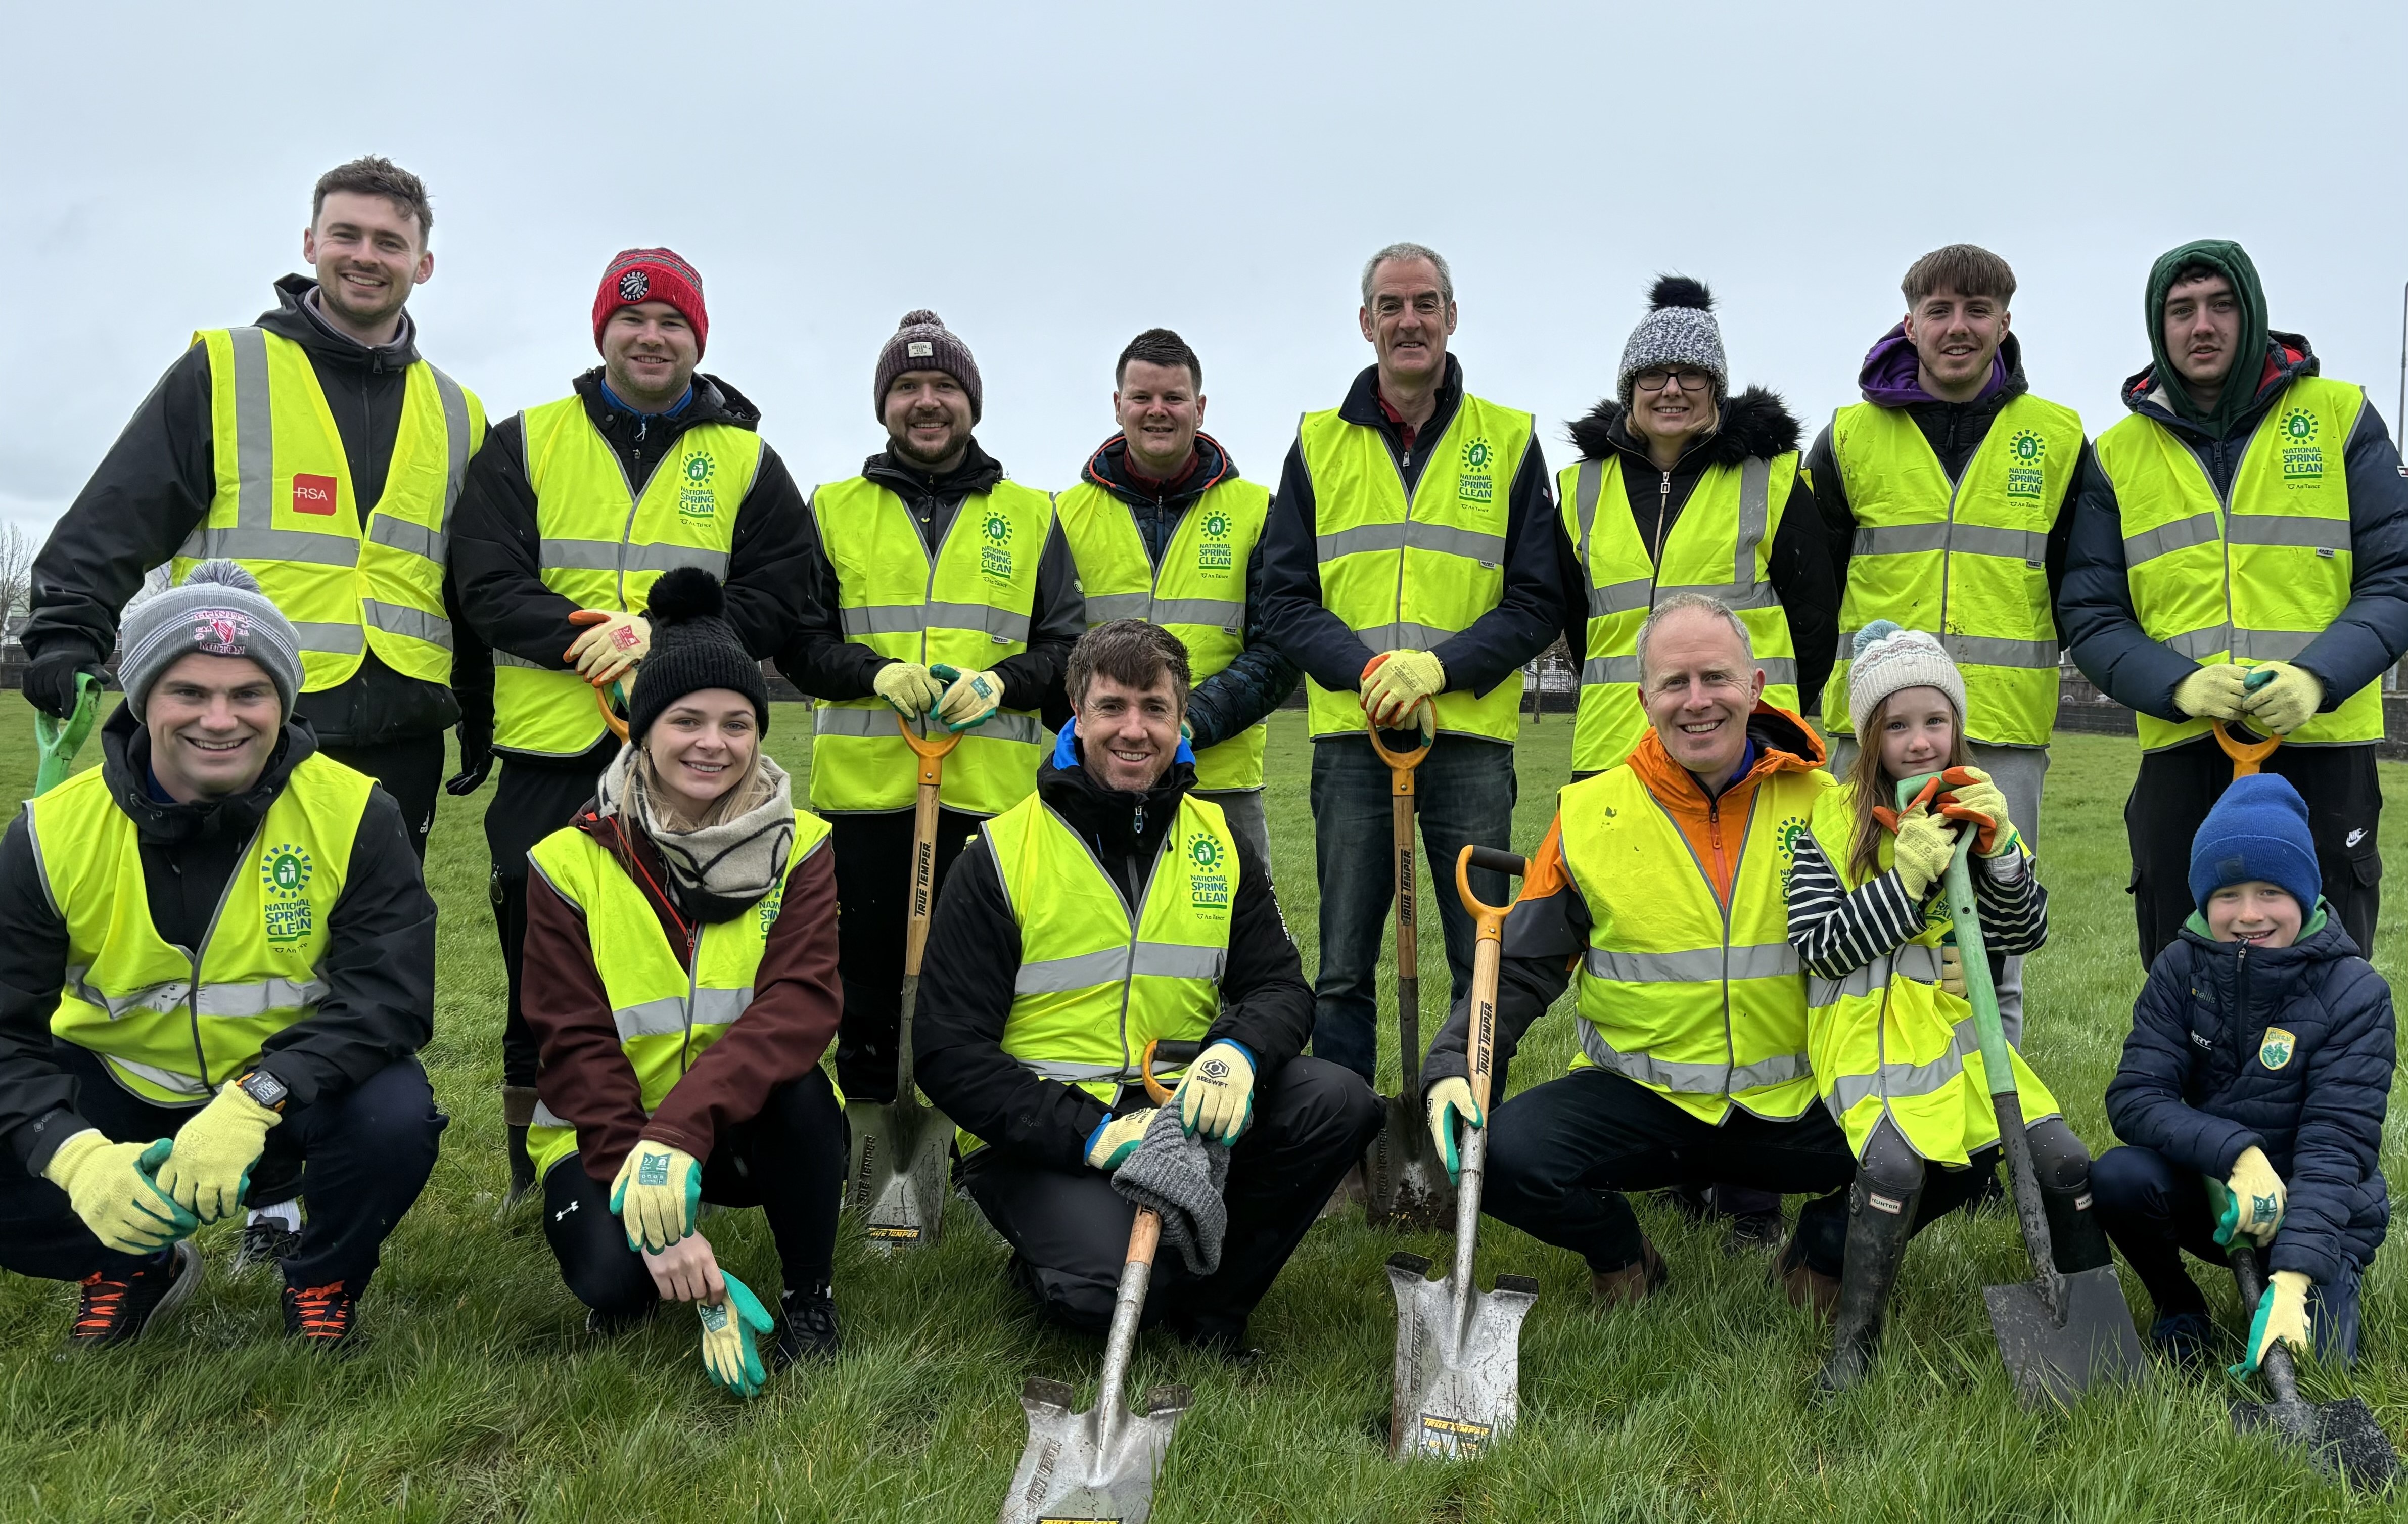 ViClarity plant over 400 native trees to improve Tralee